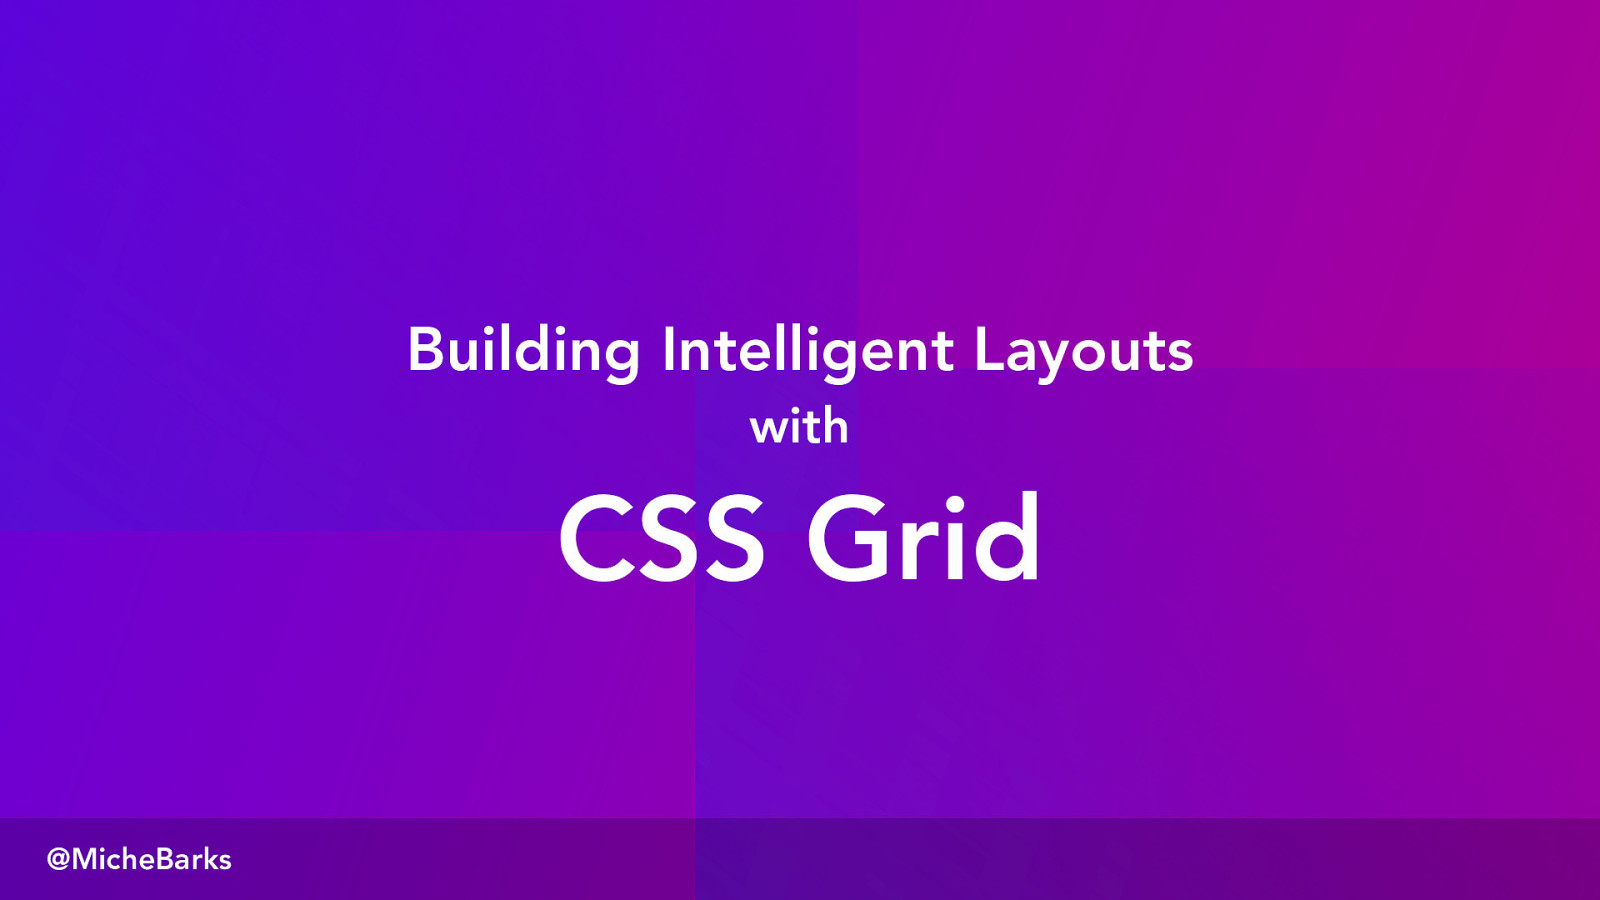 Building Intelligent Layouts with CSS Grid